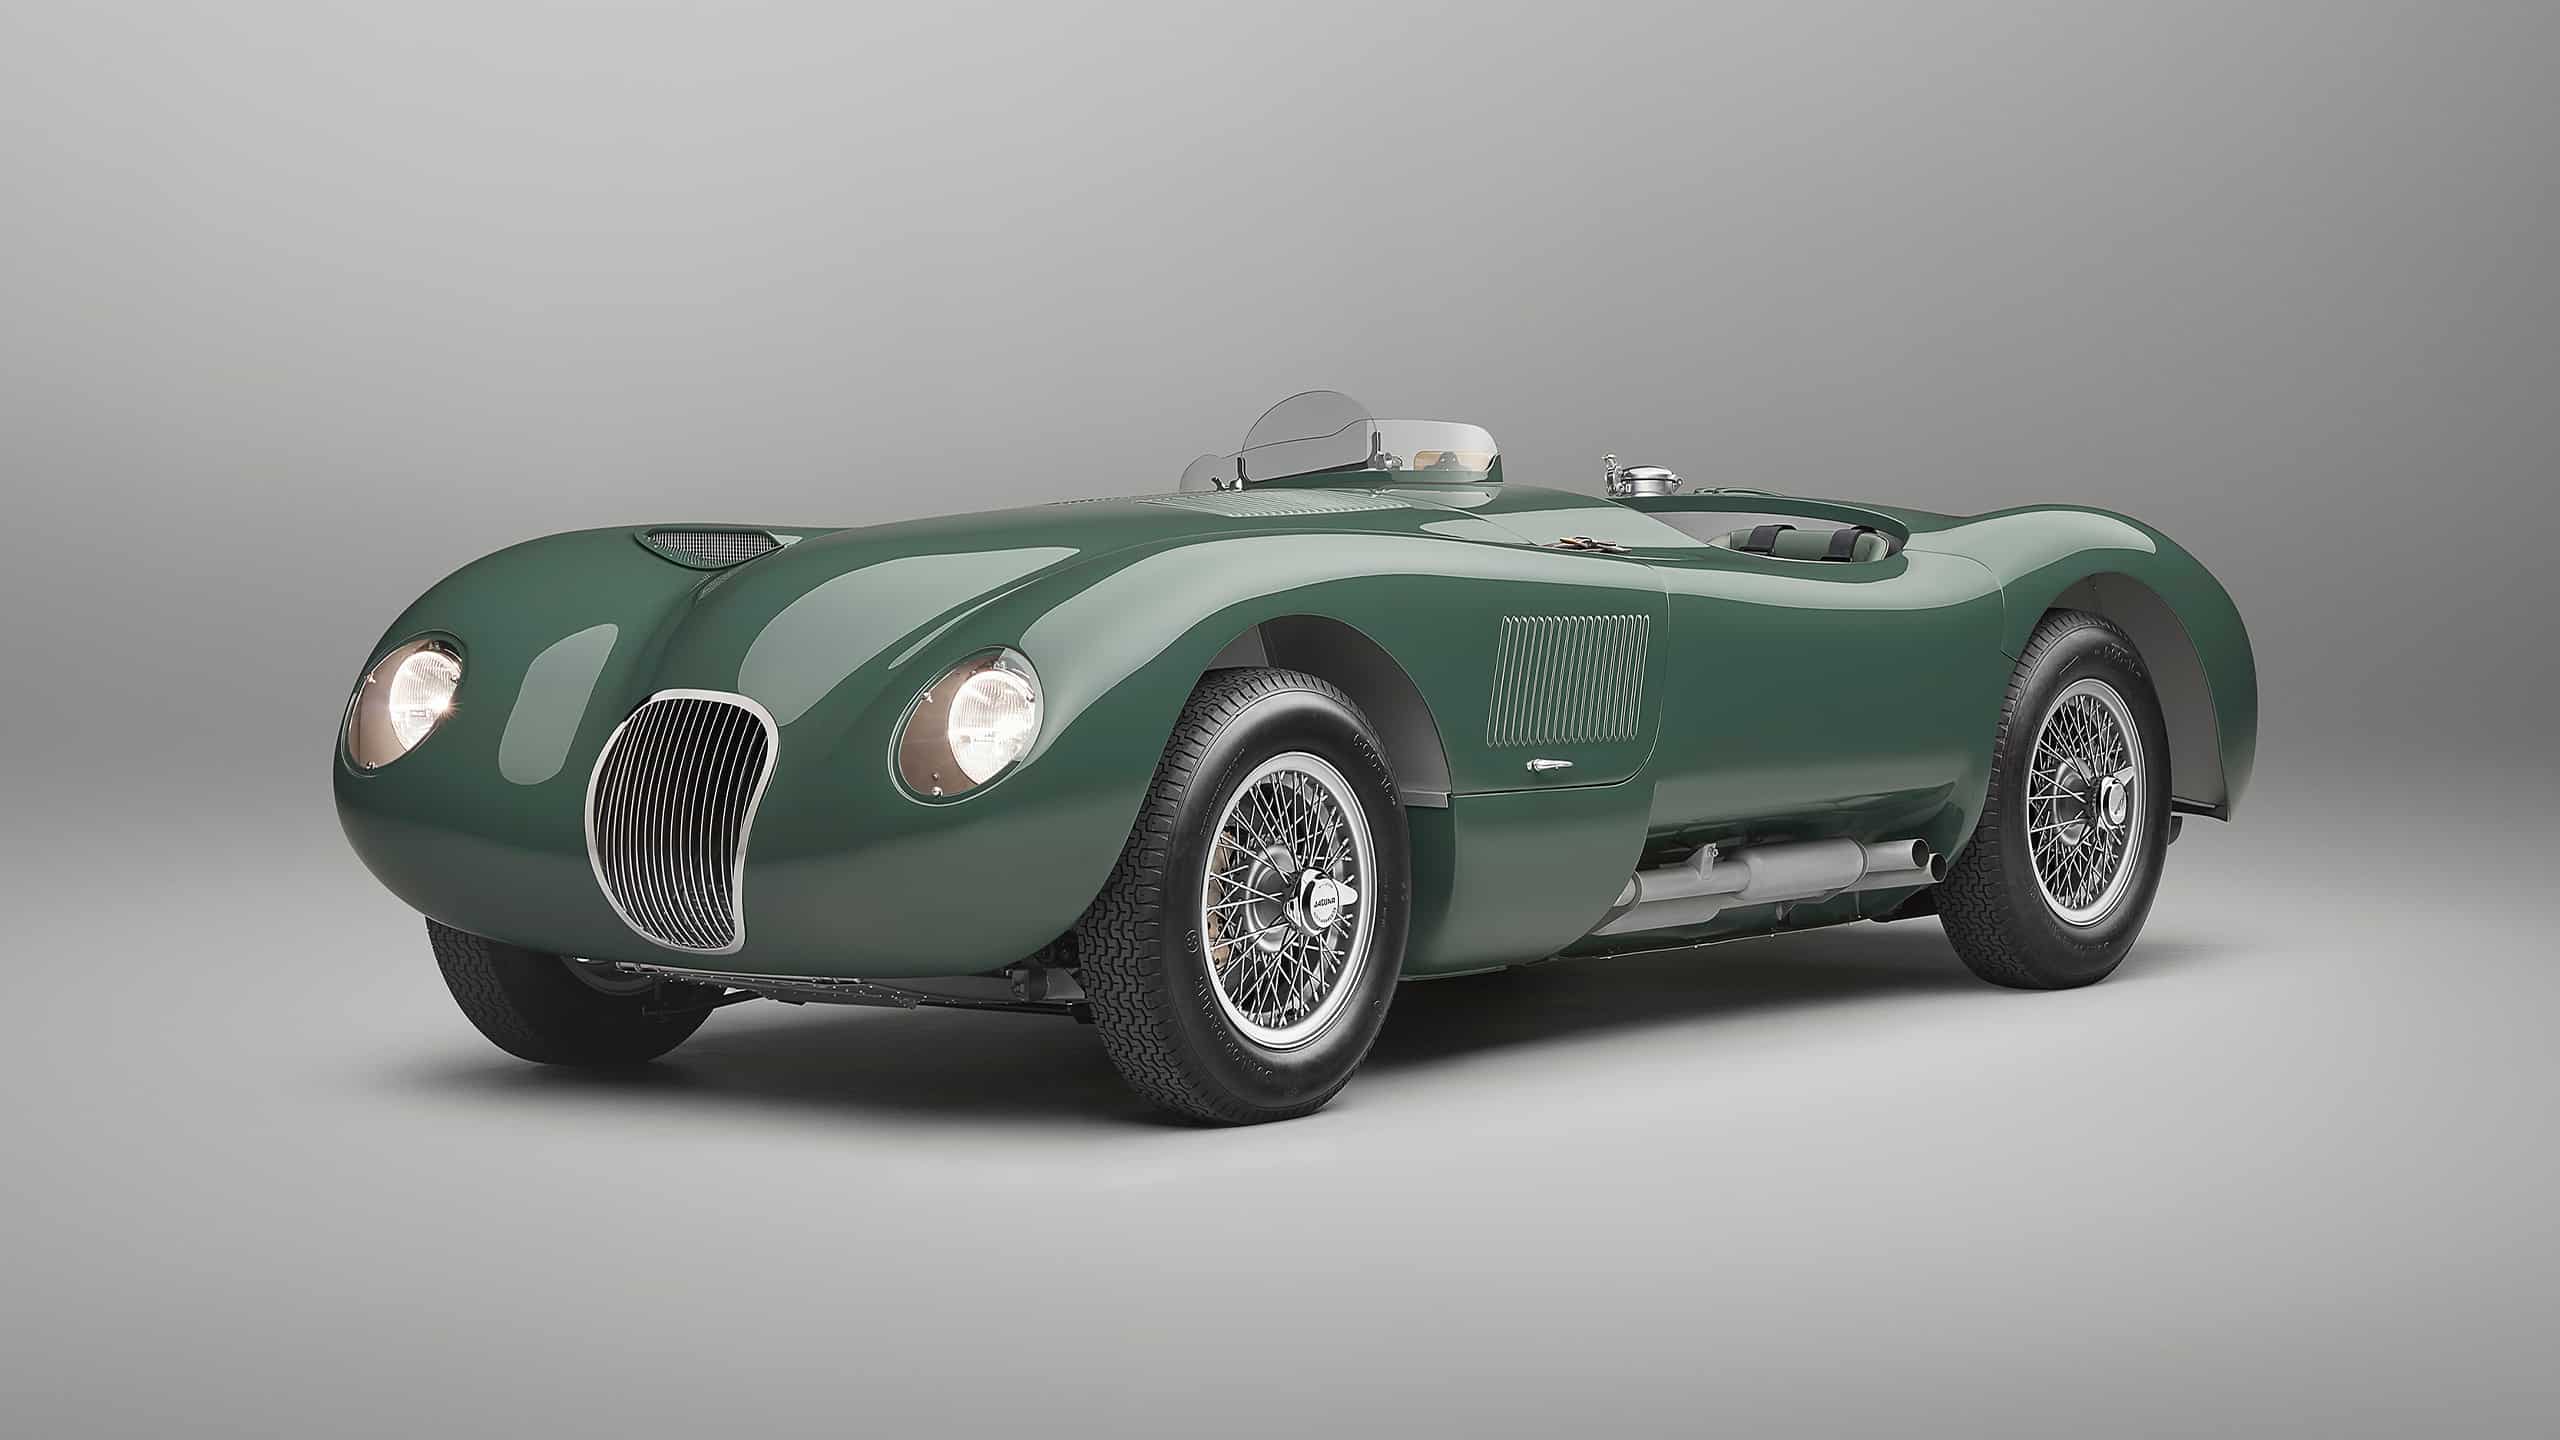 Parked Jaguar C-Type Continuation during the launching 